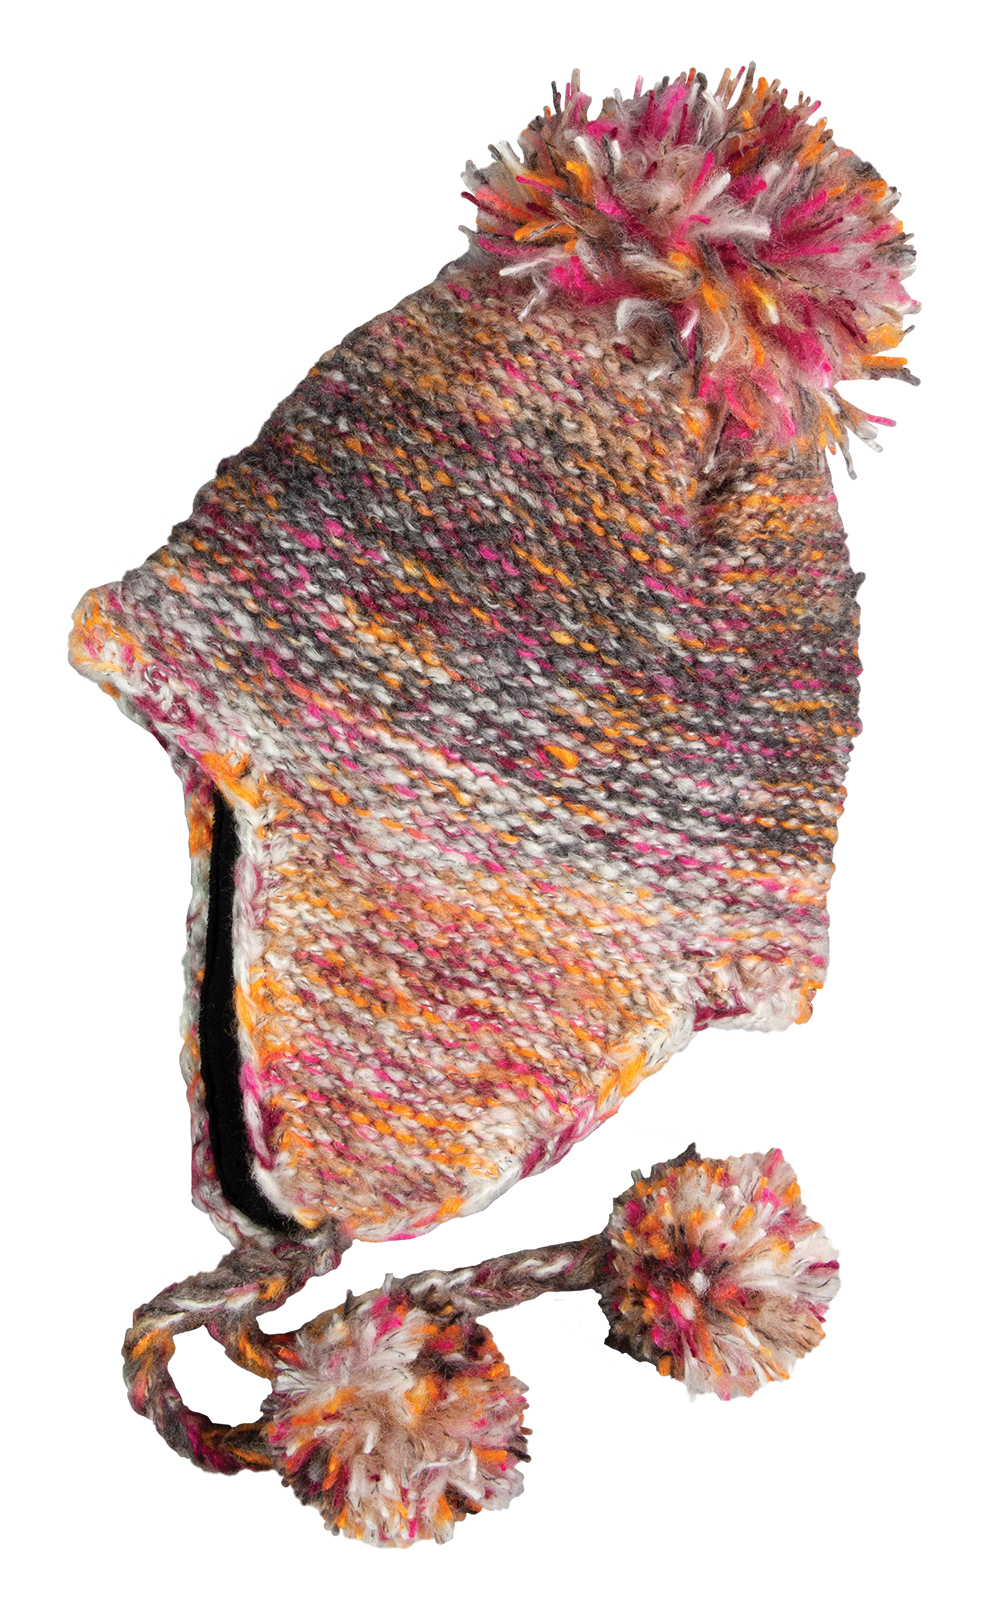 Multi-colored Acrylic Knit Peruvian - Ladies Winter Clearance